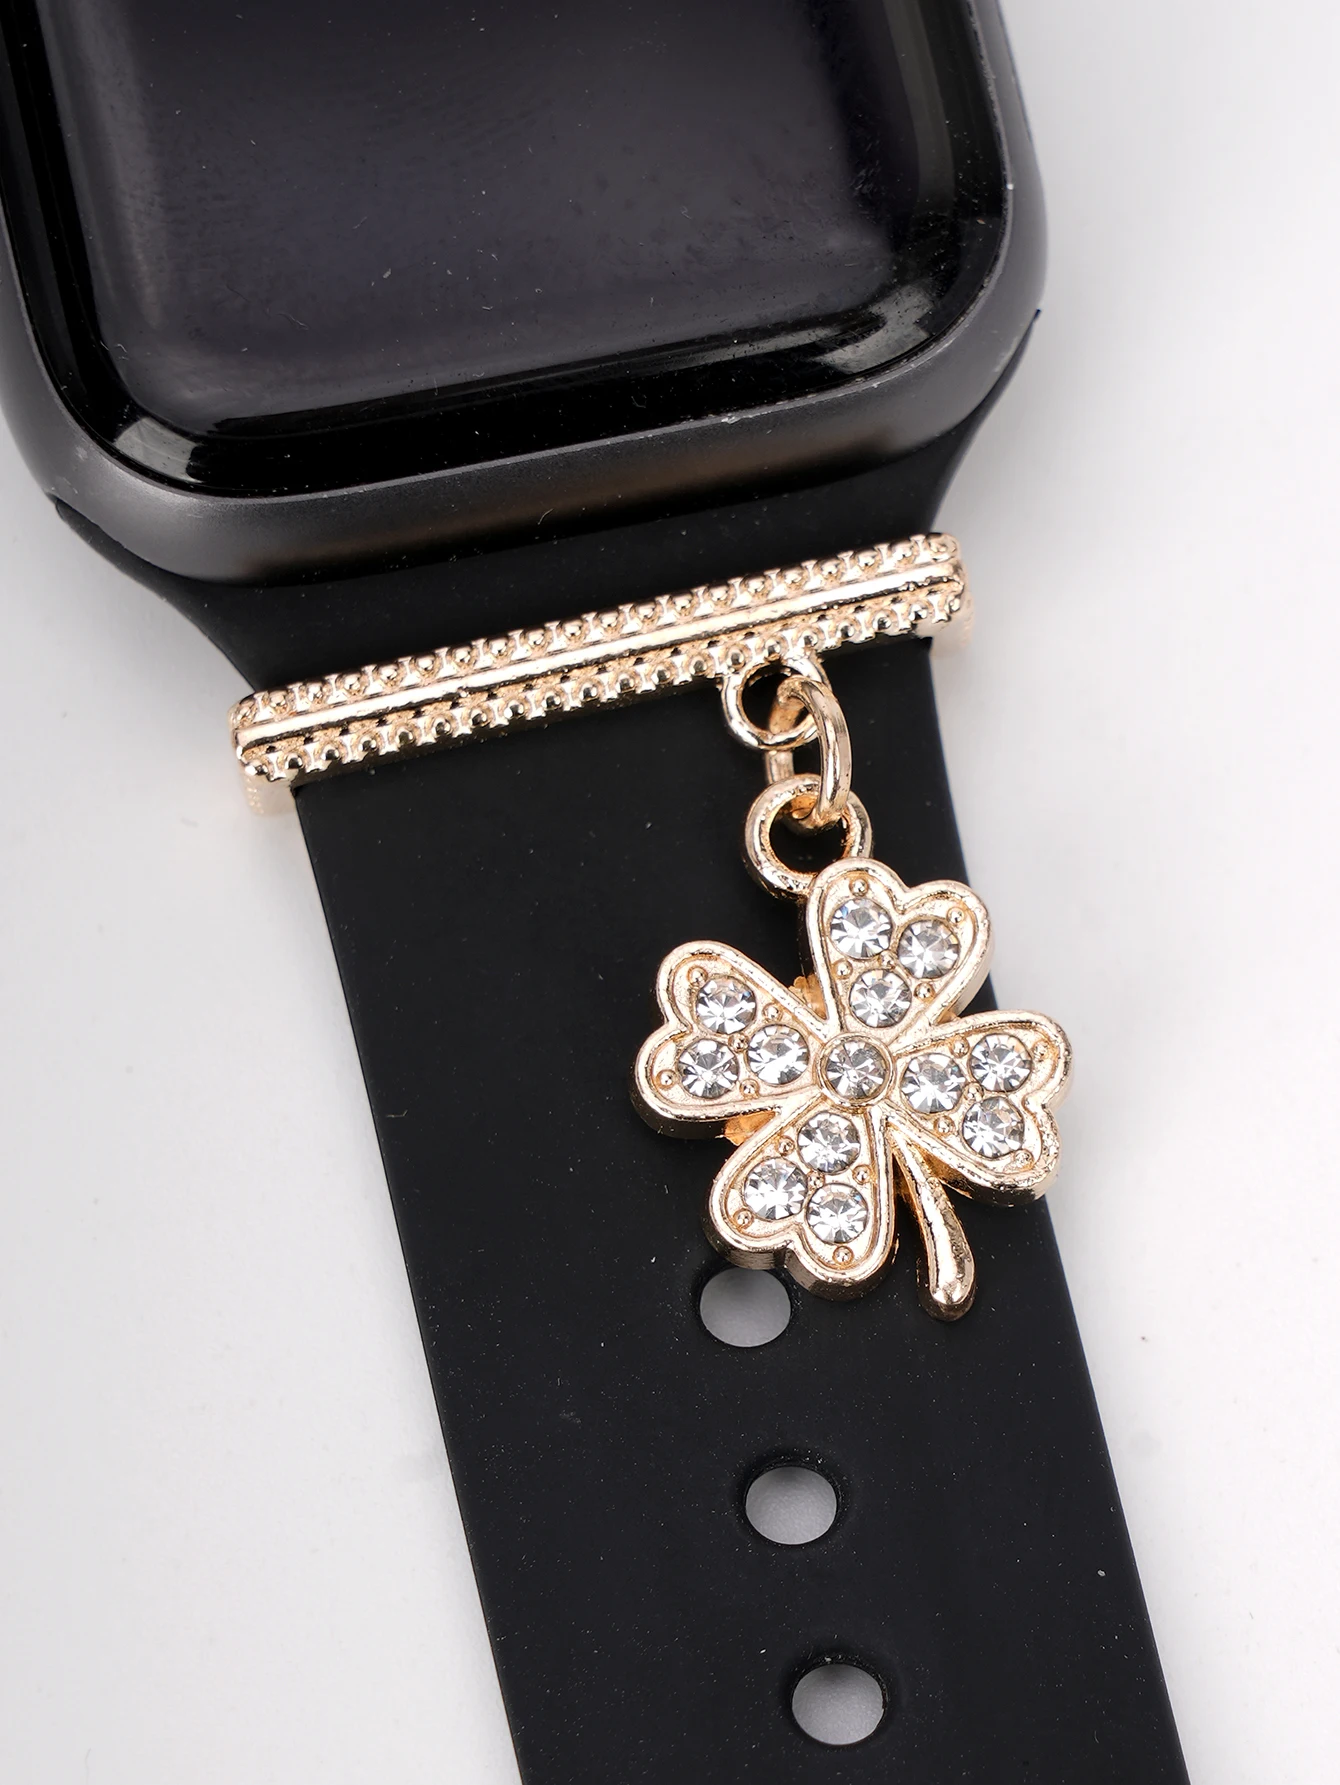 White Rhinestone Four-leaf Clover Charm Strap Decorative Ring for Apple Watch Silicone Strap Decorative Jewelry Accessories